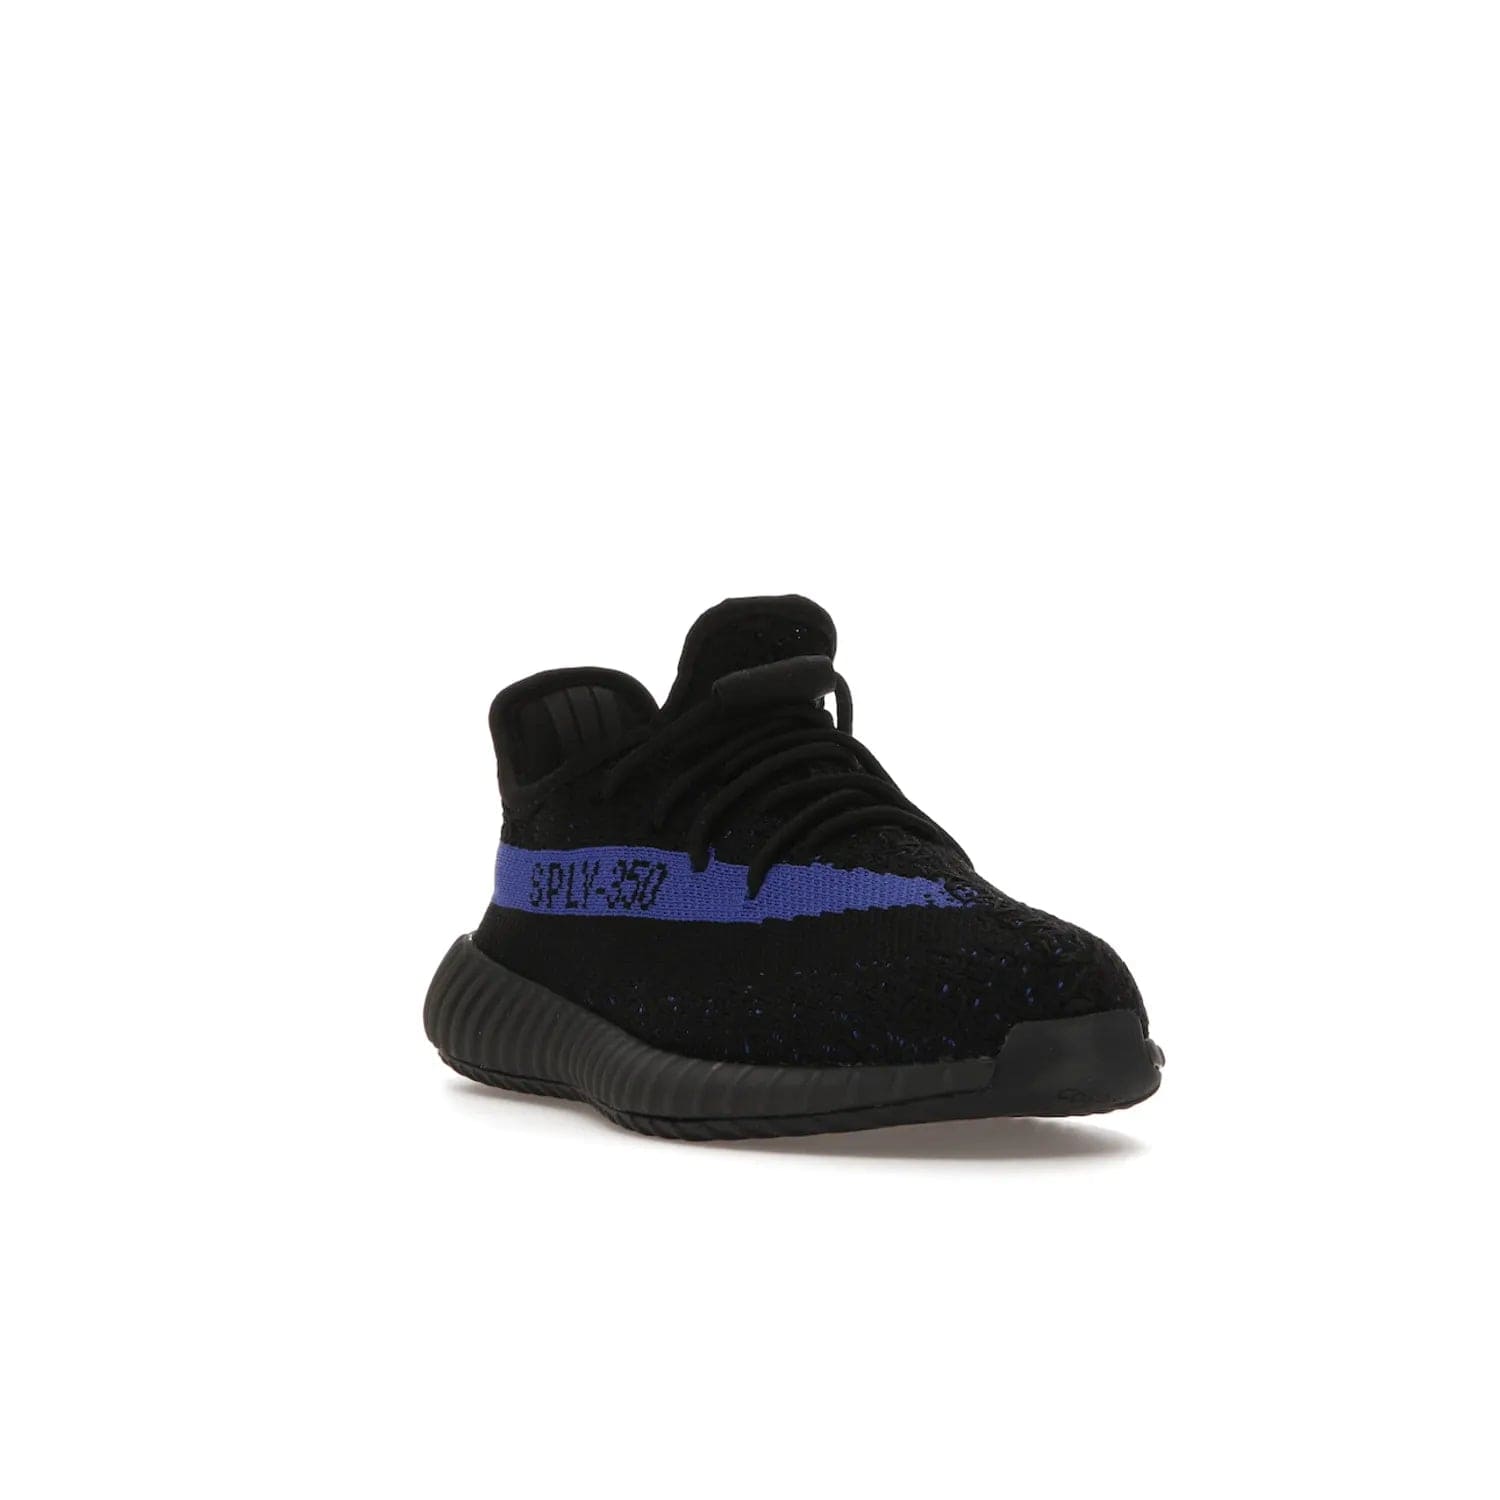 adidas Yeezy Boost 350 V2 Dazzling Blue (Kids) - Image 7 - Only at www.BallersClubKickz.com - Shop the adidas Yeezy Boost 350 V2 Dazzling Blue (Kids). Features a black Primeknit upper with a royal blue 'SPLY-350' streak and a full-length Boost midsole. Durable rubber outsole provides plenty of traction. Available for $160.